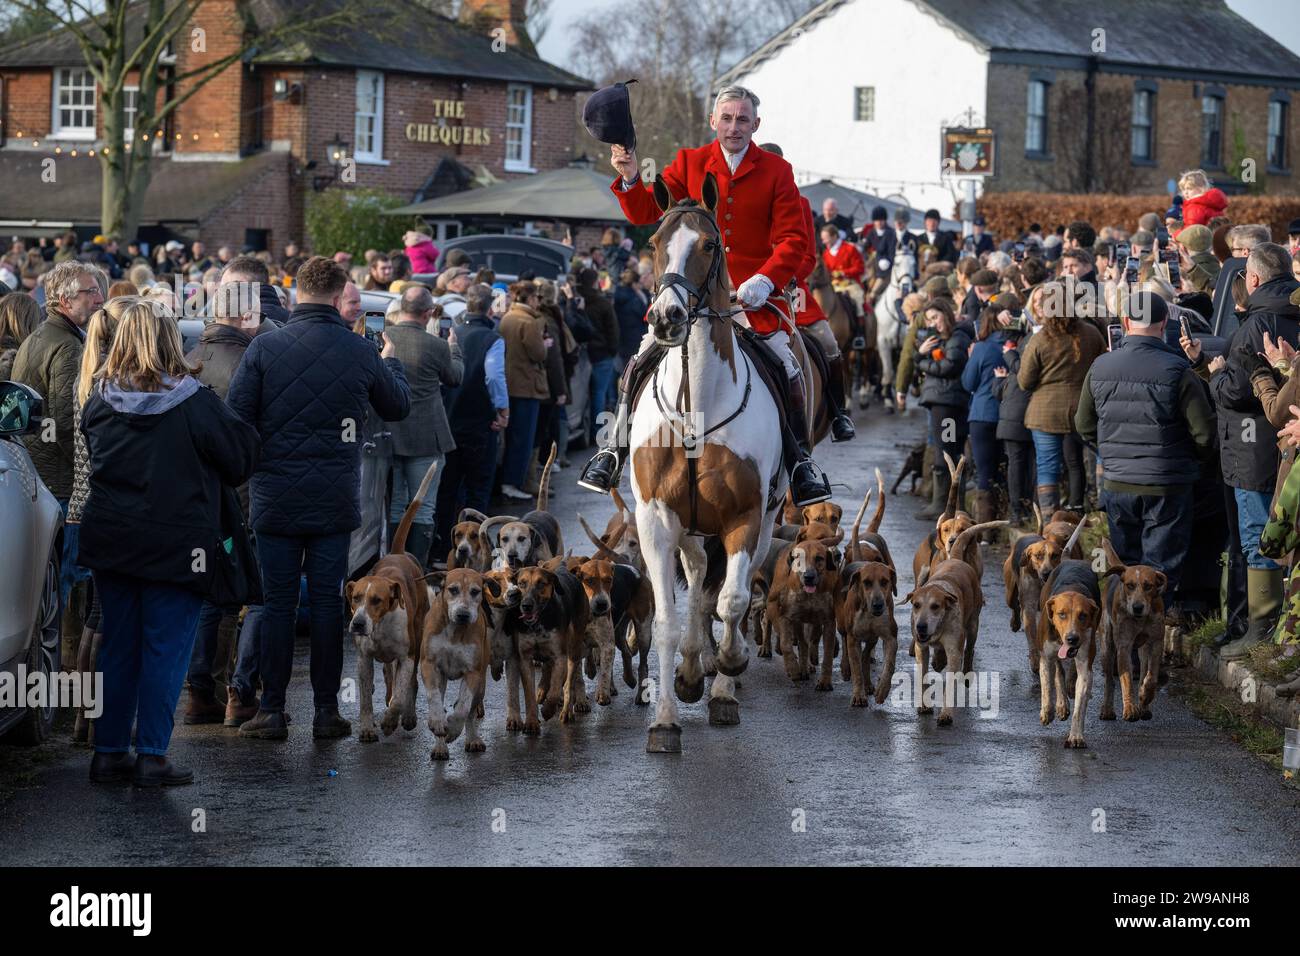 Essex with Farmers and Union Hunt Hundreds of people attend as the Essex with Farmers and Union Hunt sets off for it s annual Boxing Day ride from the Chequers Pub in the rural Essex village of Matching Green UK. The Essex Hunt has met regularly in Matching Green since the early 19th century, although since the 2004 Hunting Act it has not been allowed to use dogs to chase and kill foxes. Matching Green Essex UK Copyright: xMartinxDaltonx Essex Hunt 261223 MD 183 Stock Photo